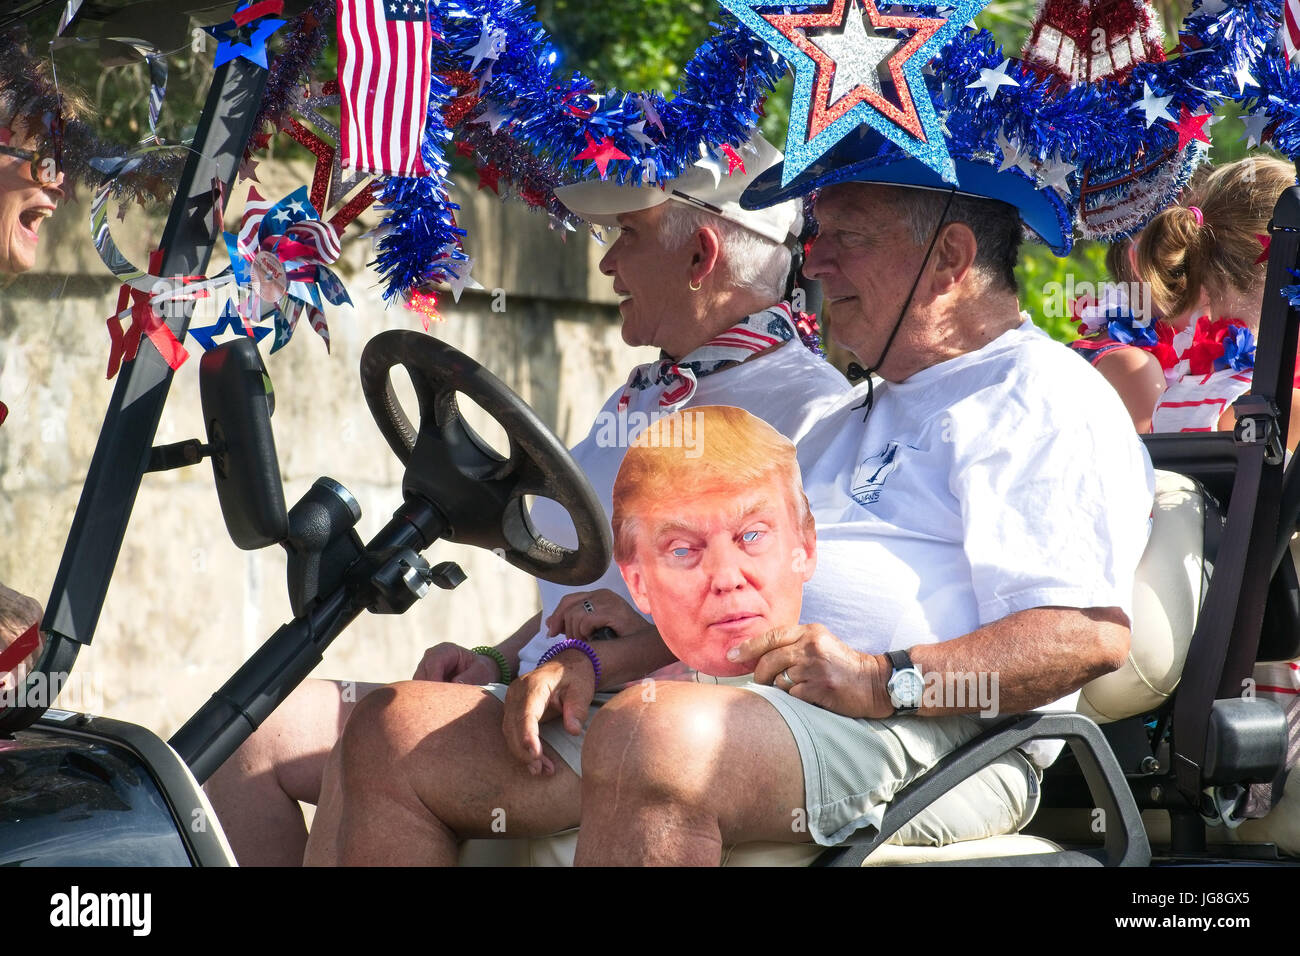 Sullivan's Island, South Carolina, USA. 4th July, 2017. An elderly man rides along with a Donald Trump mask during the annual Sullivan's Island Independence Day parade July 4, 2017 in Sullivan's Island, South Carolina. The tiny affluent sea island hosts a bicycle and golf cart parade through the historic village. Credit: Planetpix/Alamy Live News Stock Photo